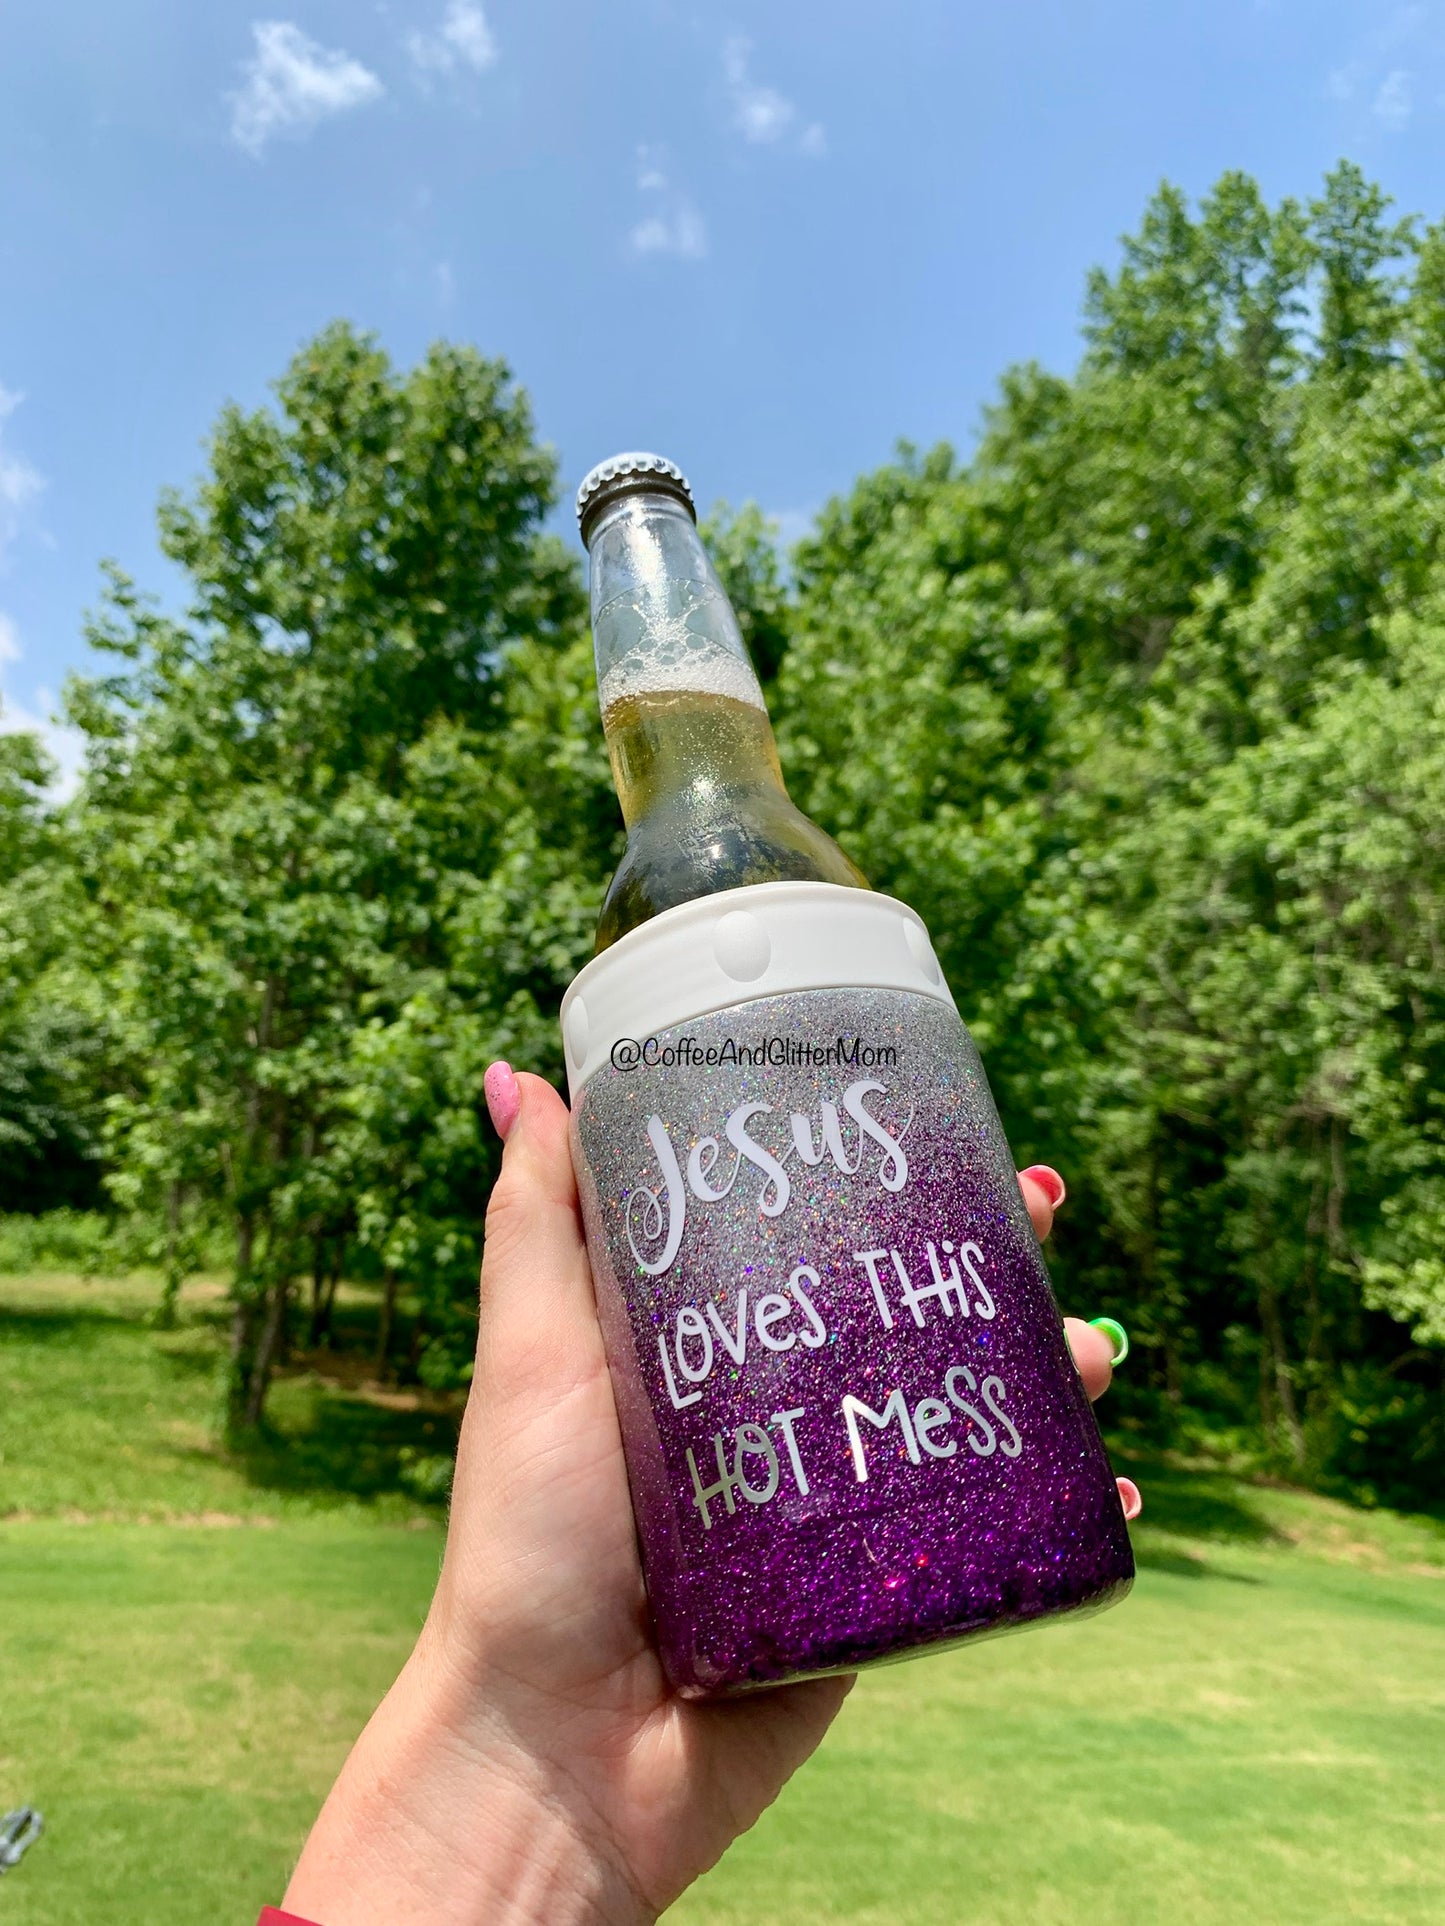 Jesus Loves This Hot Mess Can Cooler